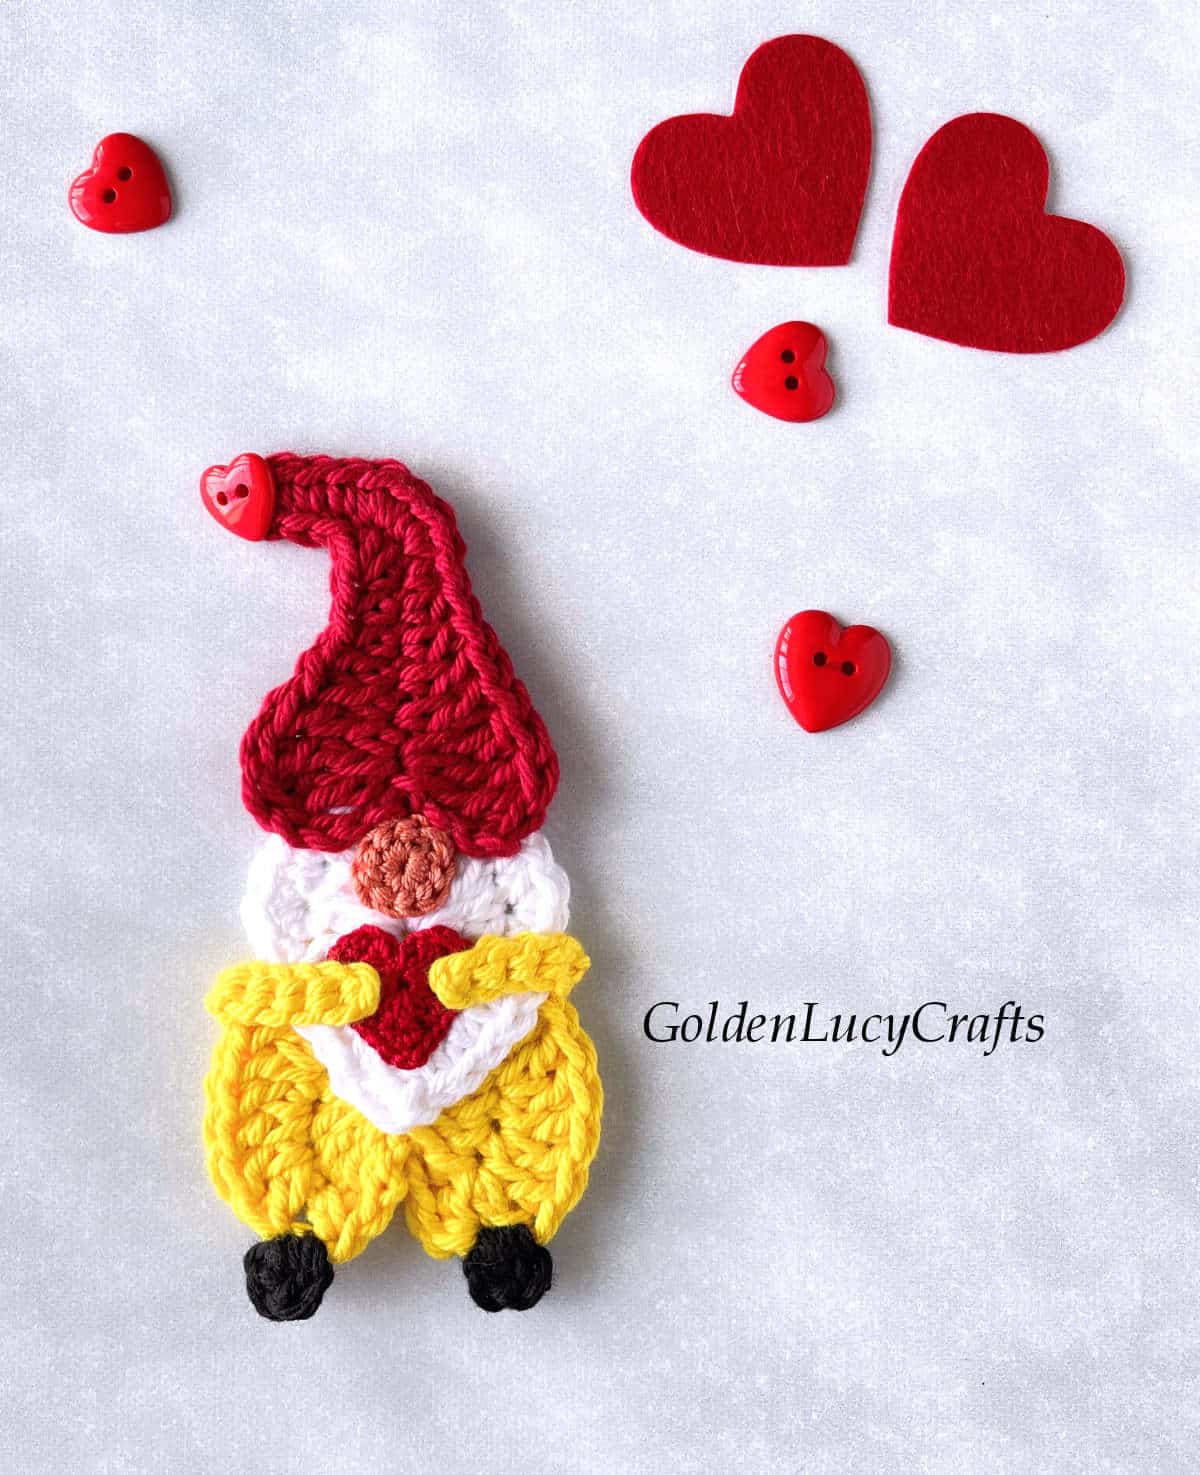 Crocheted gnome applique with heart in his hands.